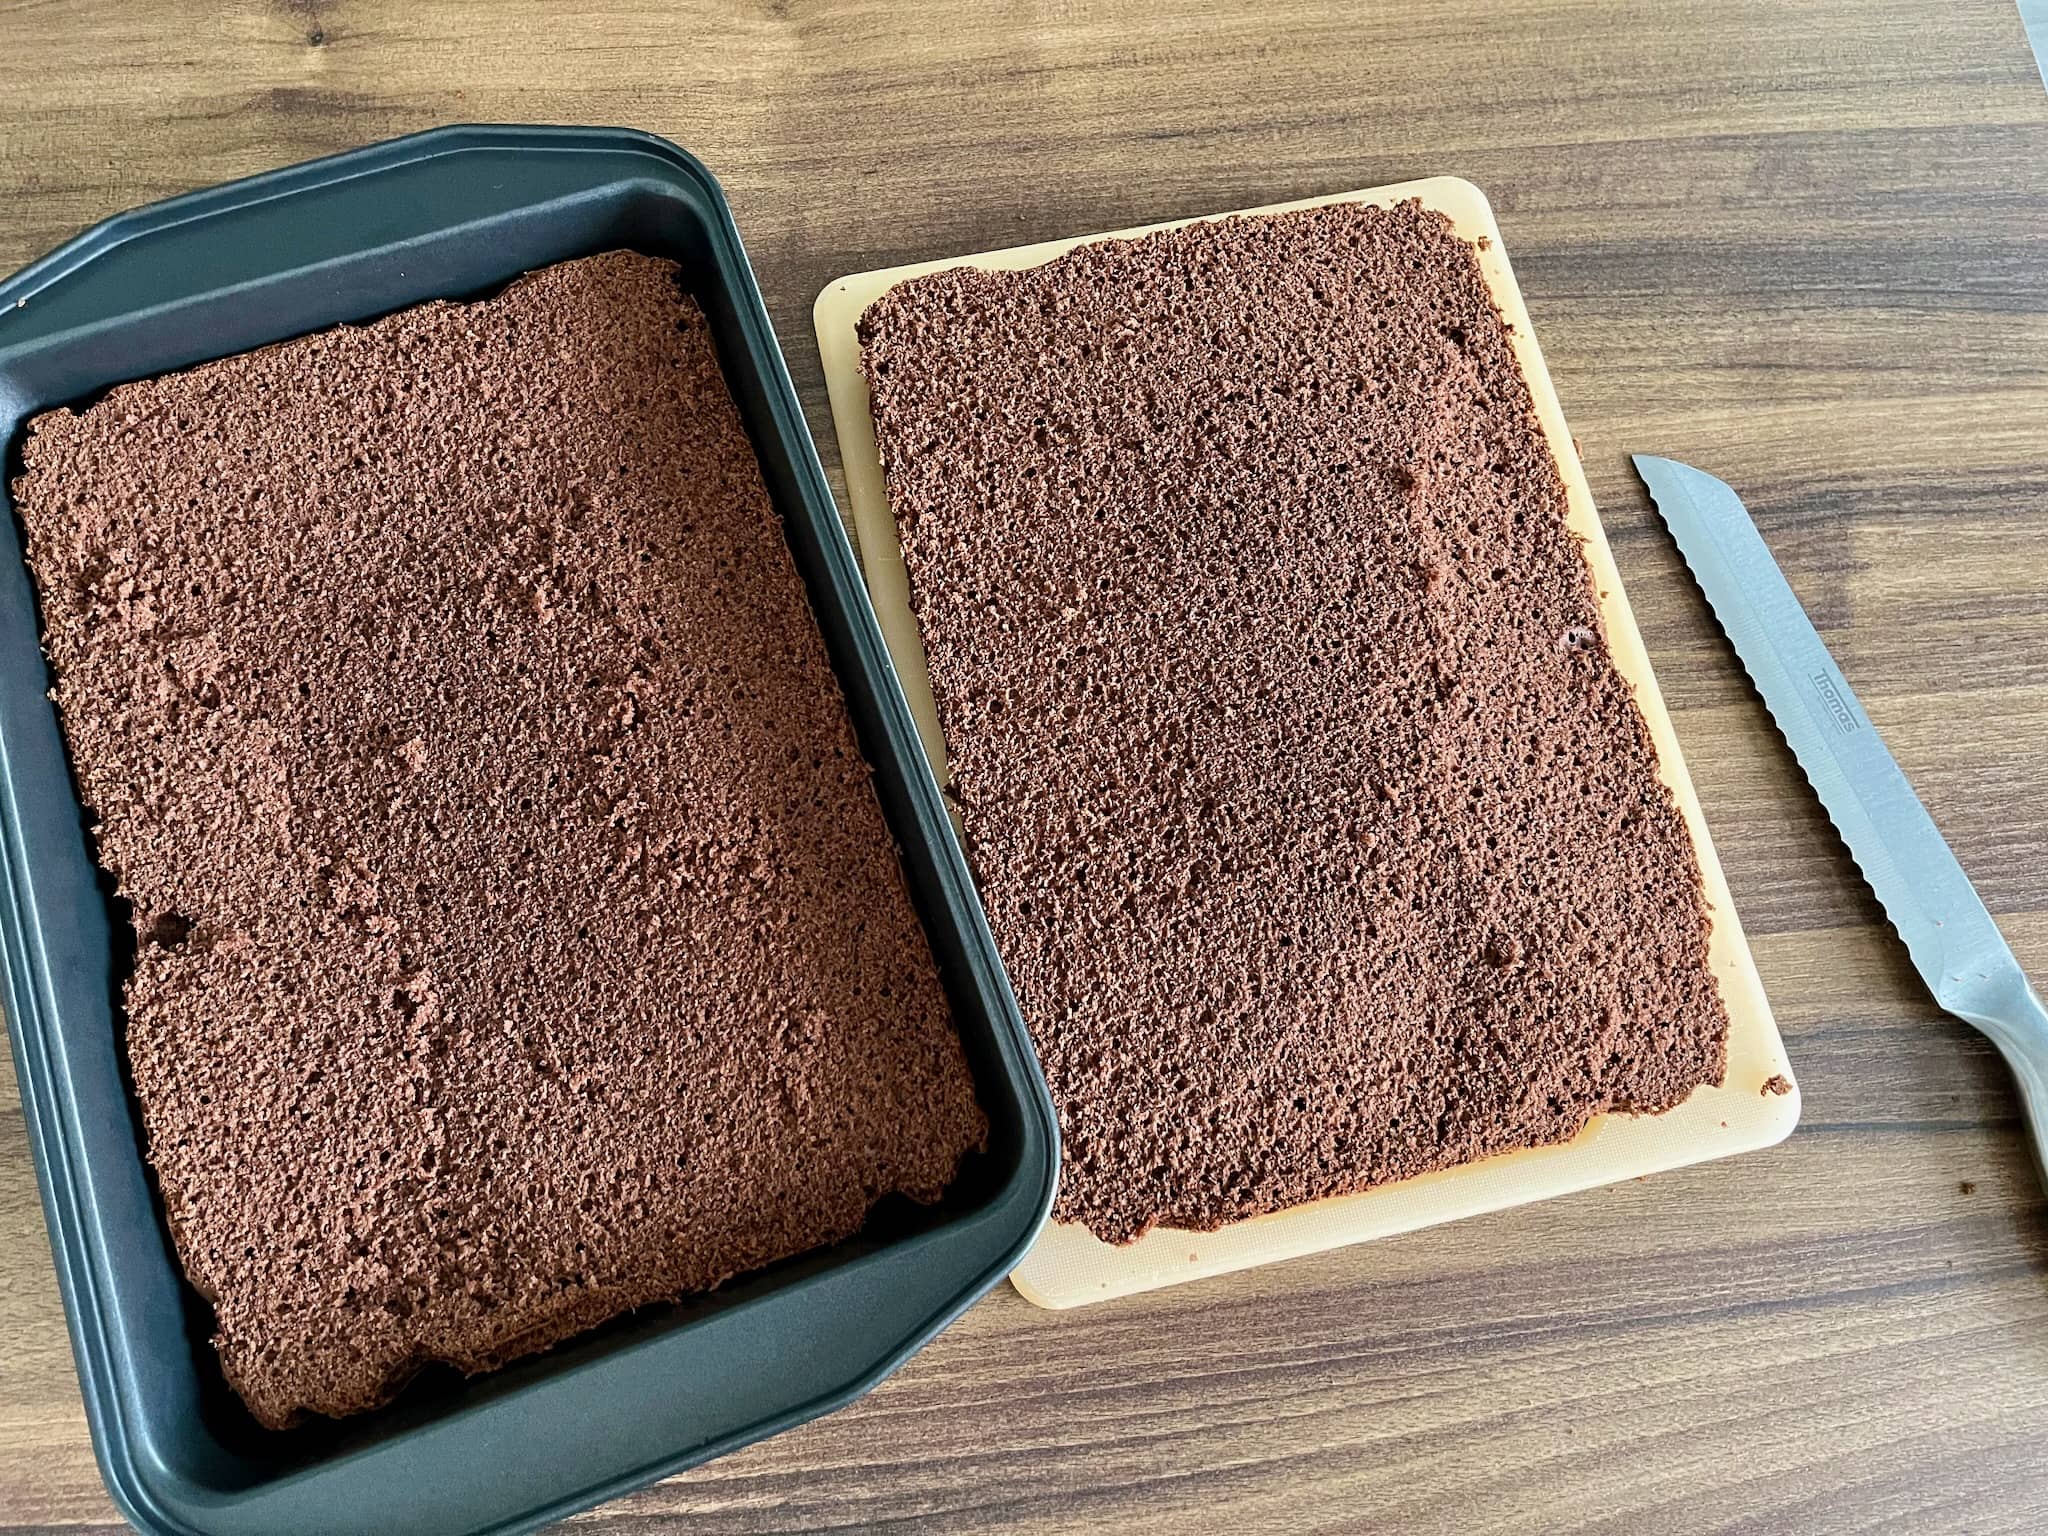 One part of the sponge cake is placed back inside the baking tray and the second is still on a tray on the side